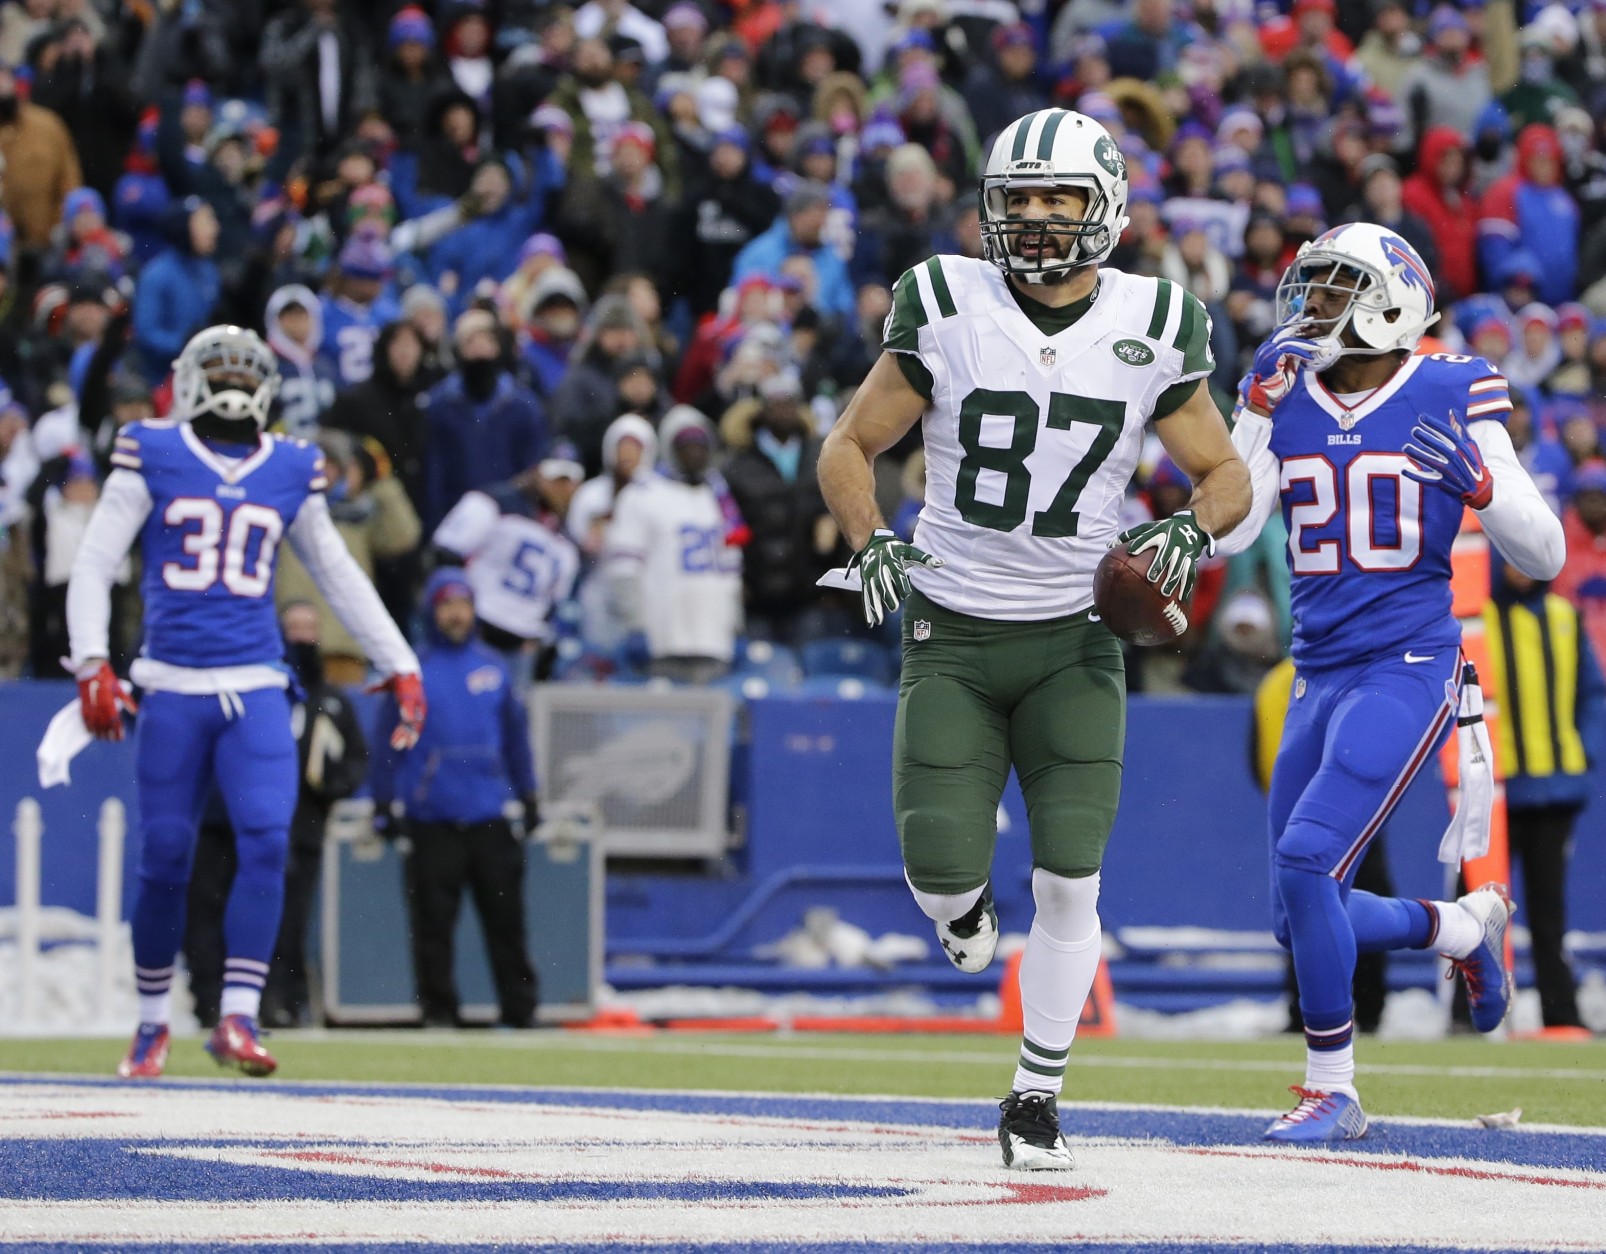 Buffalo Bills free safety Corey Graham (20) and Bacarri Rambo (30) react after New York Jets' Eric Decker (87) made a catch for a touchdown during the second half of an NFL football game Sunday, Jan. 3, 2016, in Orchard Park, N.Y. (AP Photo/Bill Wippert)